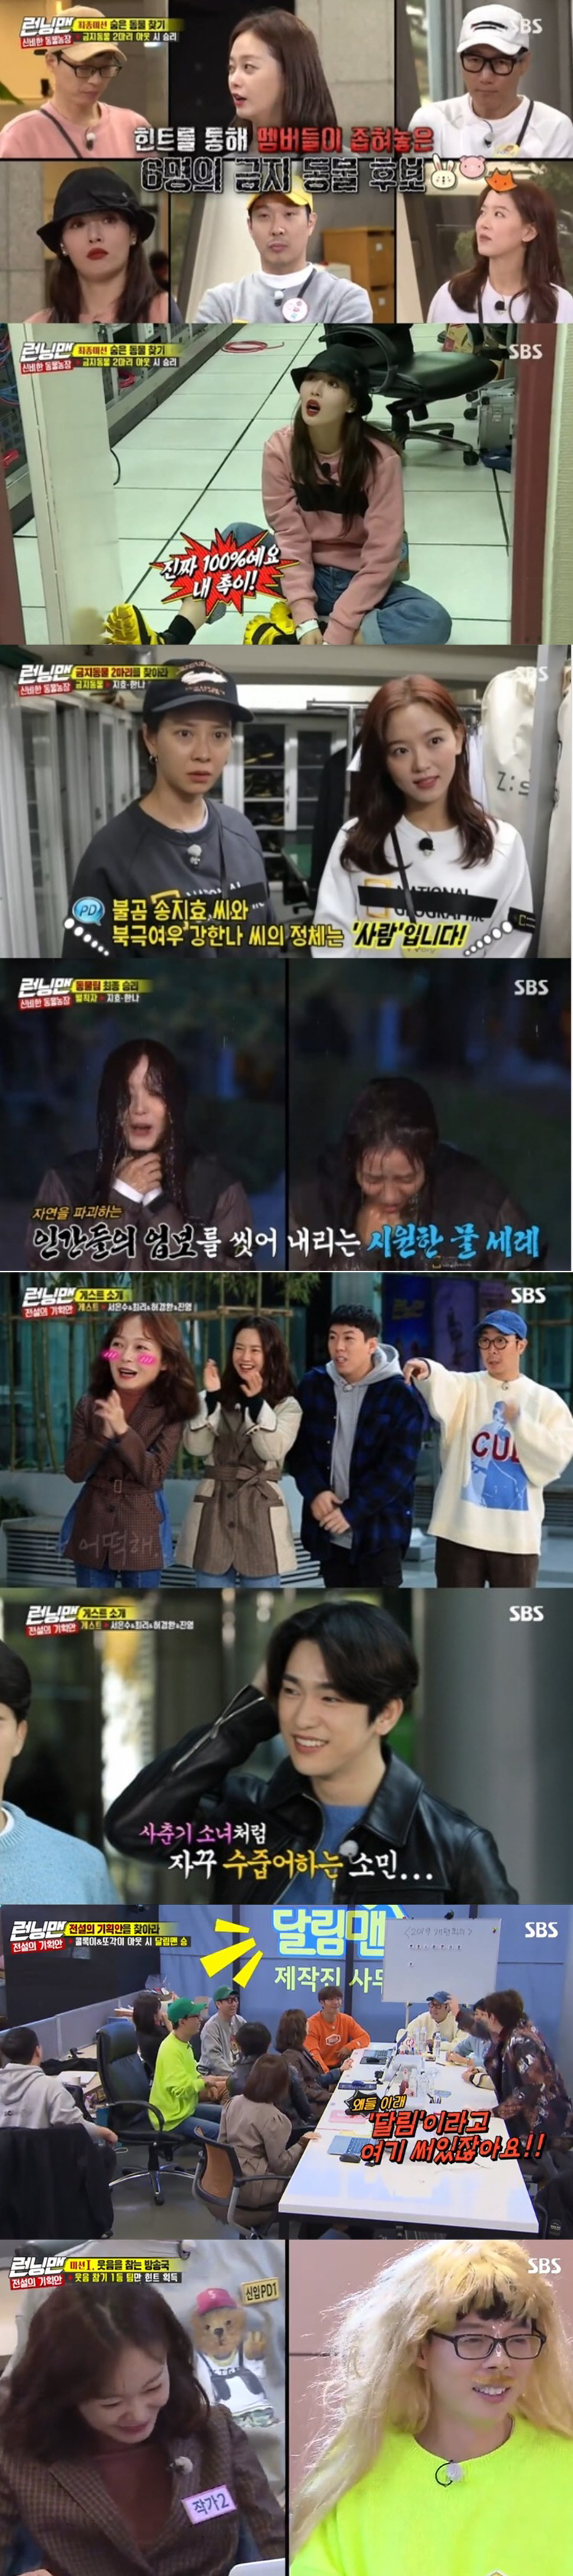 Running Man is on the rise to 10% of Per minute top TV viewer ratings and TV viewer ratings are on the rise.According to Nielsen Korea, a TV viewer rating research institute, SBS Running Man, which was broadcast on the 17th, showed an average TV viewer rating of 5.4% and 2 8.3%, respectively, showing a rise in TV viewer ratings for the sixth consecutive week.The 2049 Target TV viewer ratings, an important indicator of major advertising officials, rose by 4.8% (based on the second part of the Seoul metropolitan area TV viewer ratings), not only to beat all of the Masked Wang and Dog ear is donkey ear, but also 1% more than last week.Per minute The best TV viewer ratings shot a whopping 10 percent.On this day, the broadcast was decorated with the final race of Mysterious Animal Farm and started to search for prohibited animals.If you find a forbidden animal and in-N-Out Burger, the general animal wins, but the forbidden animal was able to use the closed area.When an In-N-Out Burgered animal is created by a prohibited animal, a closed area is created and all hints in the closed area disappear, and even if the animal is inside it, the In-N-Out Burger is made.Yoo Jae-Suks performance shone in the face of everyone questioning each other.Yoo Jae-Suk found out that the forbidden animals were people, and he noticed that Kang Han-Na and Song Ji-hyo were sisters and bears who became foxes respectively.In the meantime, Kang Han-Na and Song Ji-hyo respectively targeted Hyun-ah and Everglow Shihyeon in-N-Out Burger and Yoo Jae-Suk.Yoo Jae-Suk informed members of the identity of the banned animals in an urgent situation and eventually the banned animals Kang Han-Na and Song Ji-hyo were in-N-Out Burger and received the final penalty.On the other hand, on the same day, the Legendary Plan Race, which was guest of God Seven Jinyoung, actor Seo Eun-soo, Choi Ri and comedian Hur Kyung-hwan, was also released.Jeon So-min showed his excitement about Jinyoung, but he gave a big smile with unexpected sweat.Since then, the members have been divided into PD, writer, and new PD team of Ralim Man program and started to search for Kolok Lee and Daegak which is reported as a ghost story of broadcasting company.The first mission was to find a laugh: You have to put up with laughter under any circumstances, and if you laugh, you have to carry out a dressing penalty.With a fierce smile, The Man from Nowhere appeared in front of the members.Everyone was nervous about the powerful laugh alarm energy and this scene took the best minute with 10% of Per minute top TV viewer ratings.Next weeks broadcast will be released with the identity of Kolocki and the other.